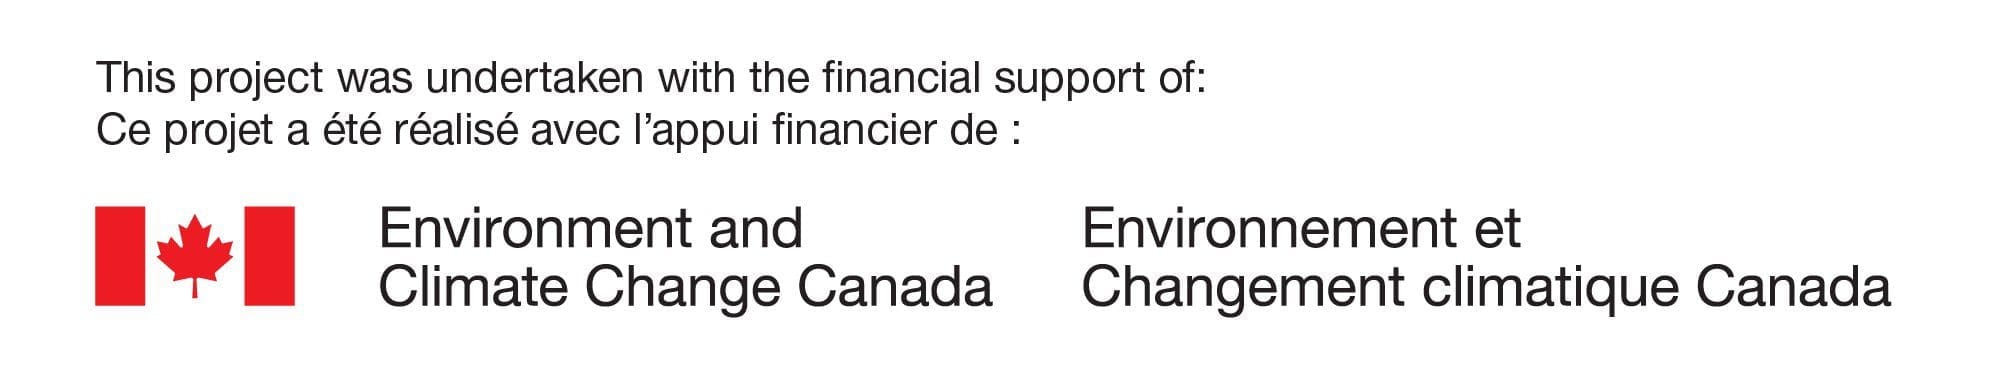 This project was undertaken with the financial support: Environment and Climate Change Canada